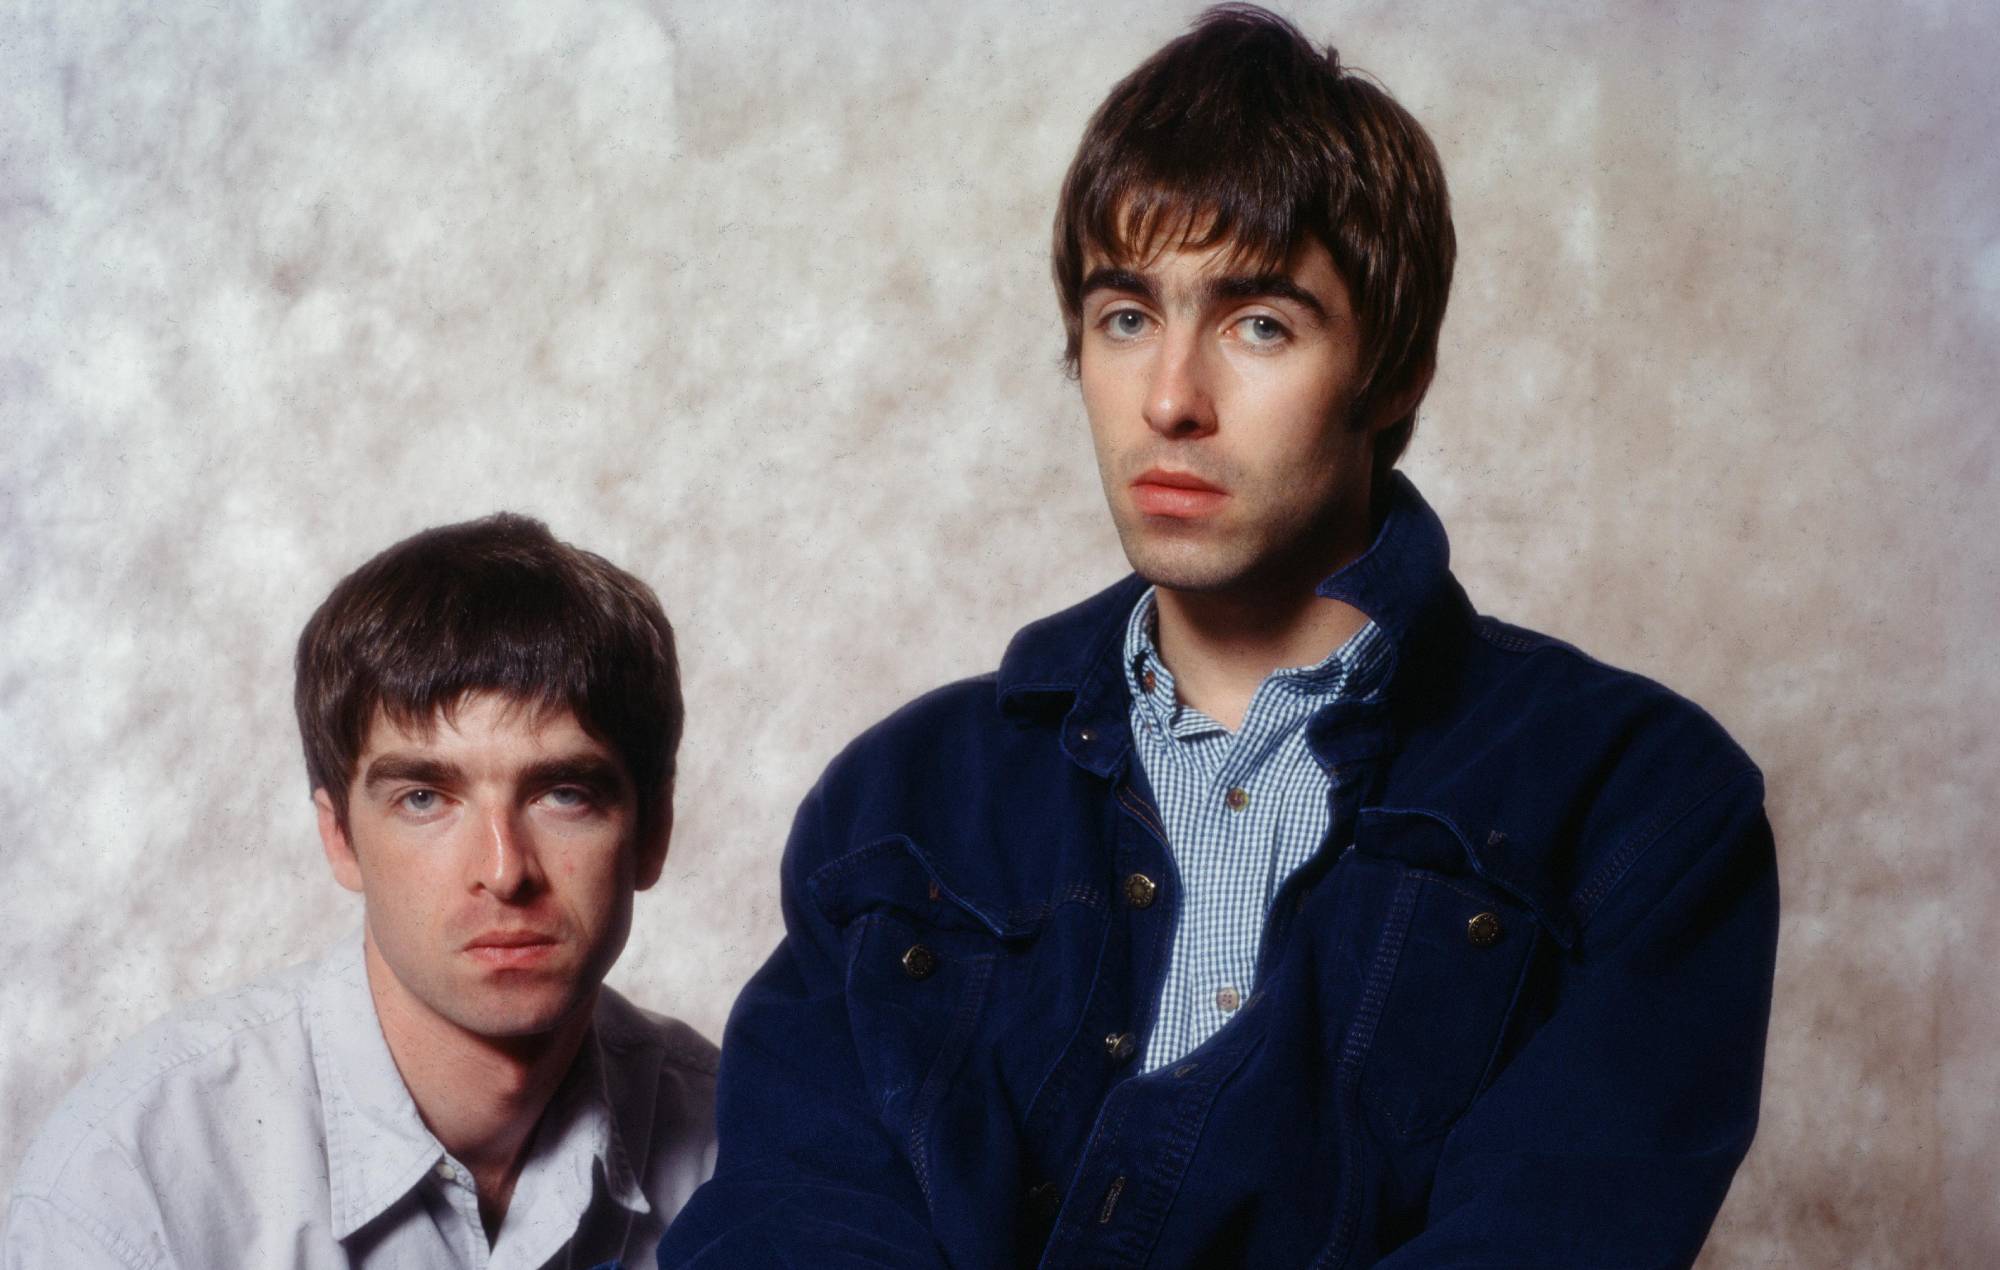 Noel Gallagher and Liam Gallagher of Oasis